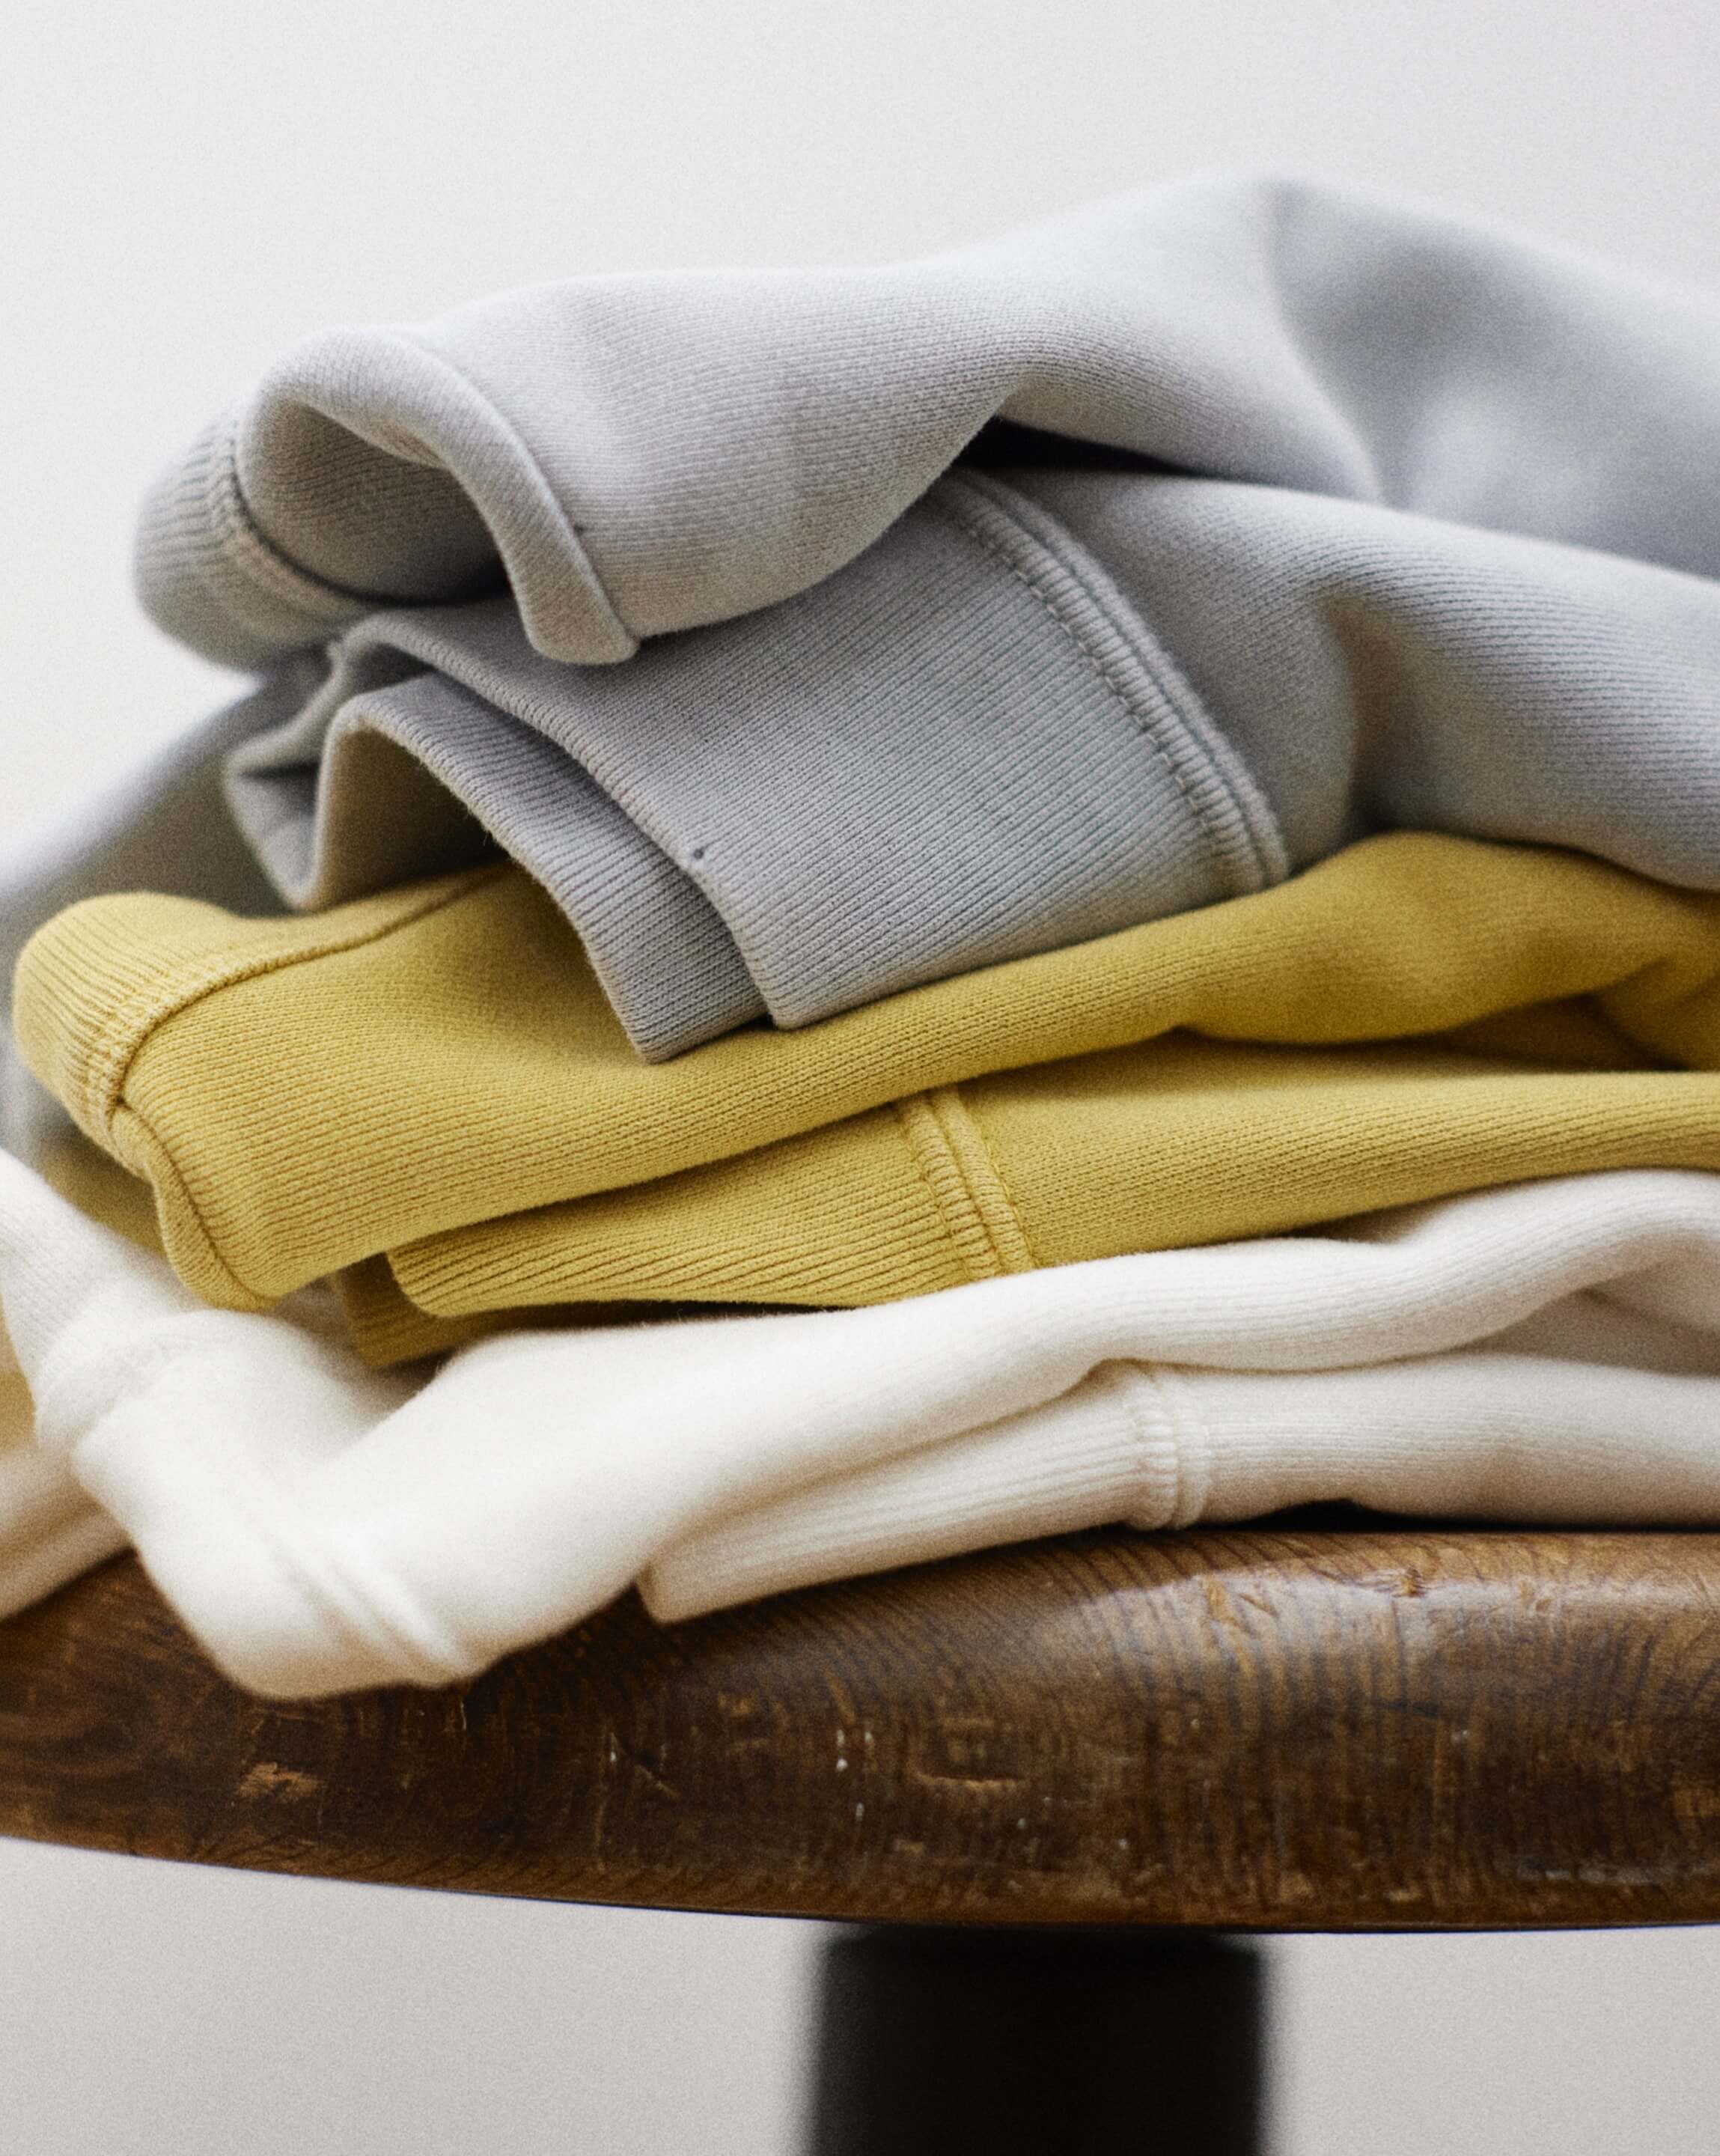 Pile of sweatshirts folded on a wooden stool.